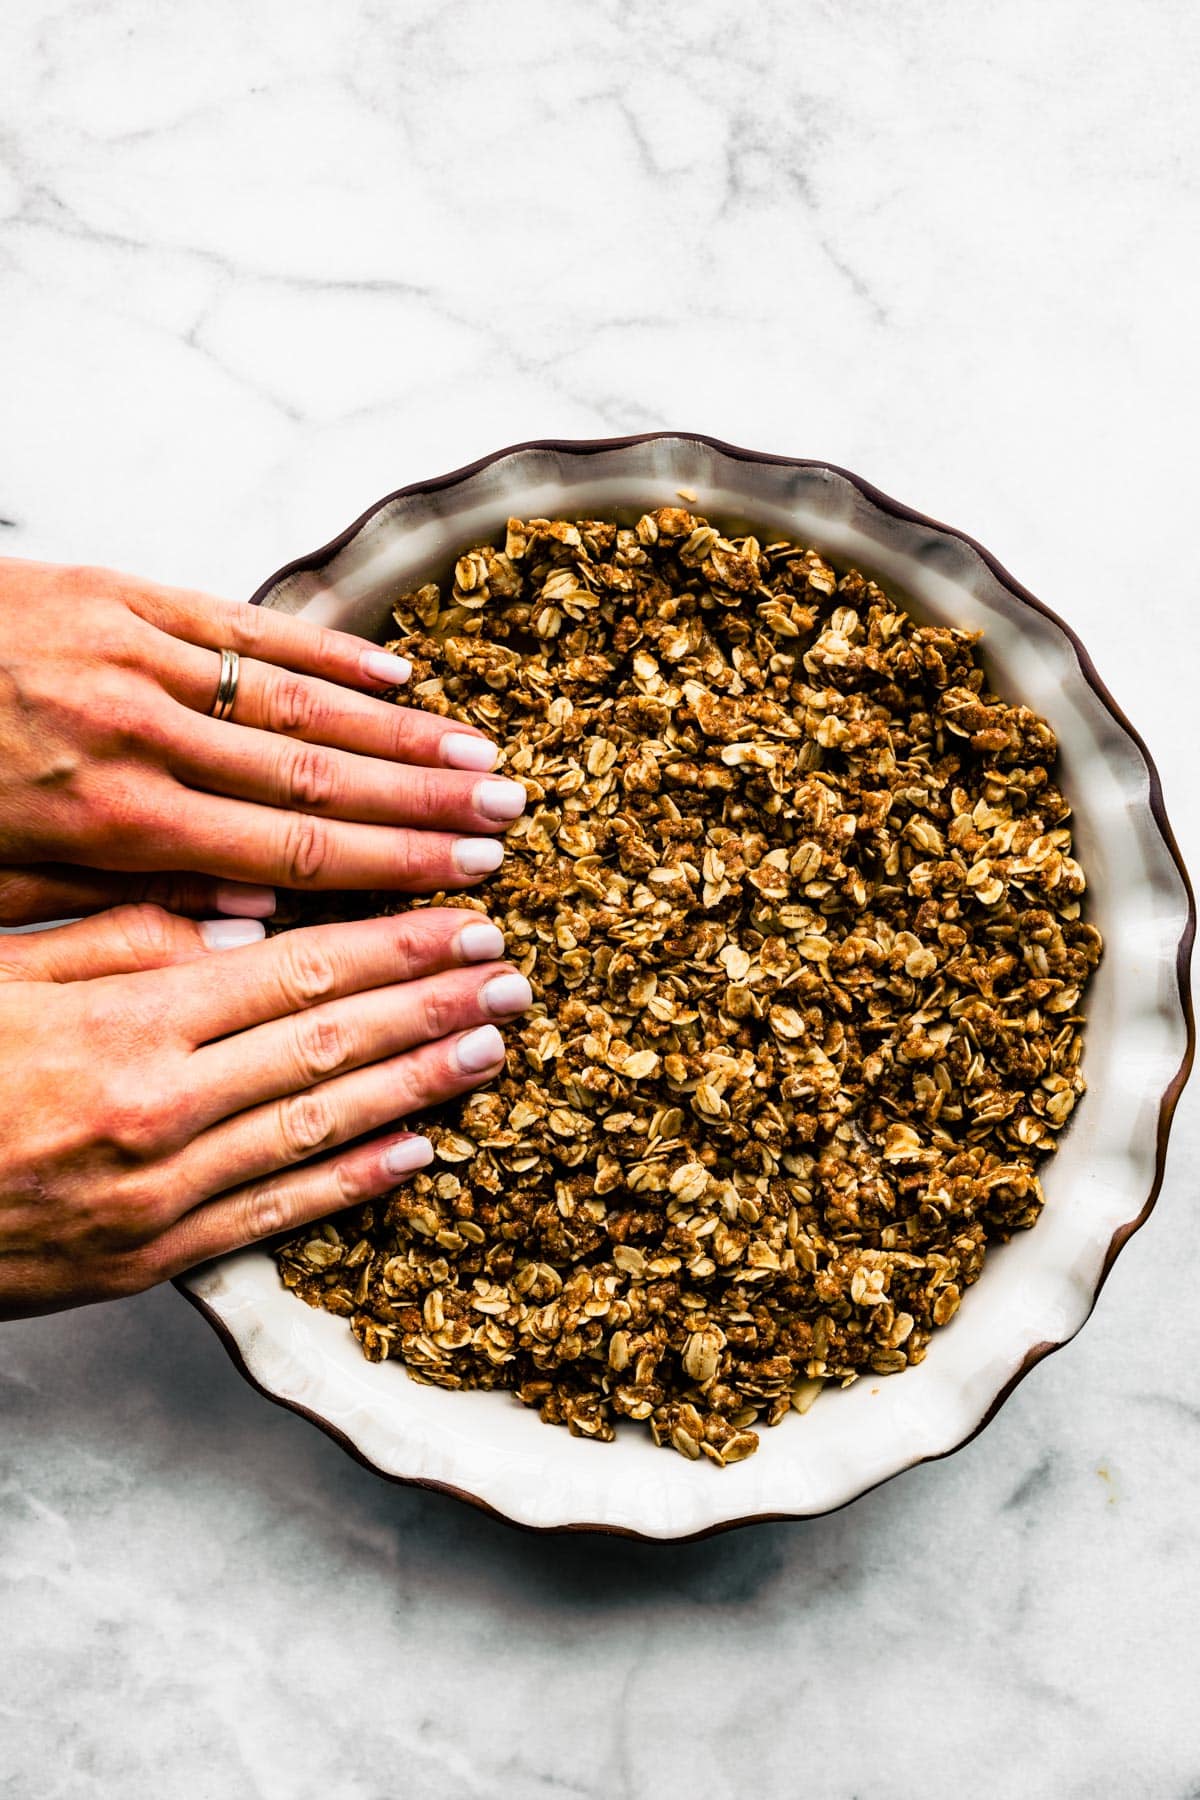 Two woman's hands pressing gluten free oatmeal crumble into a pie pan of apple crisp.